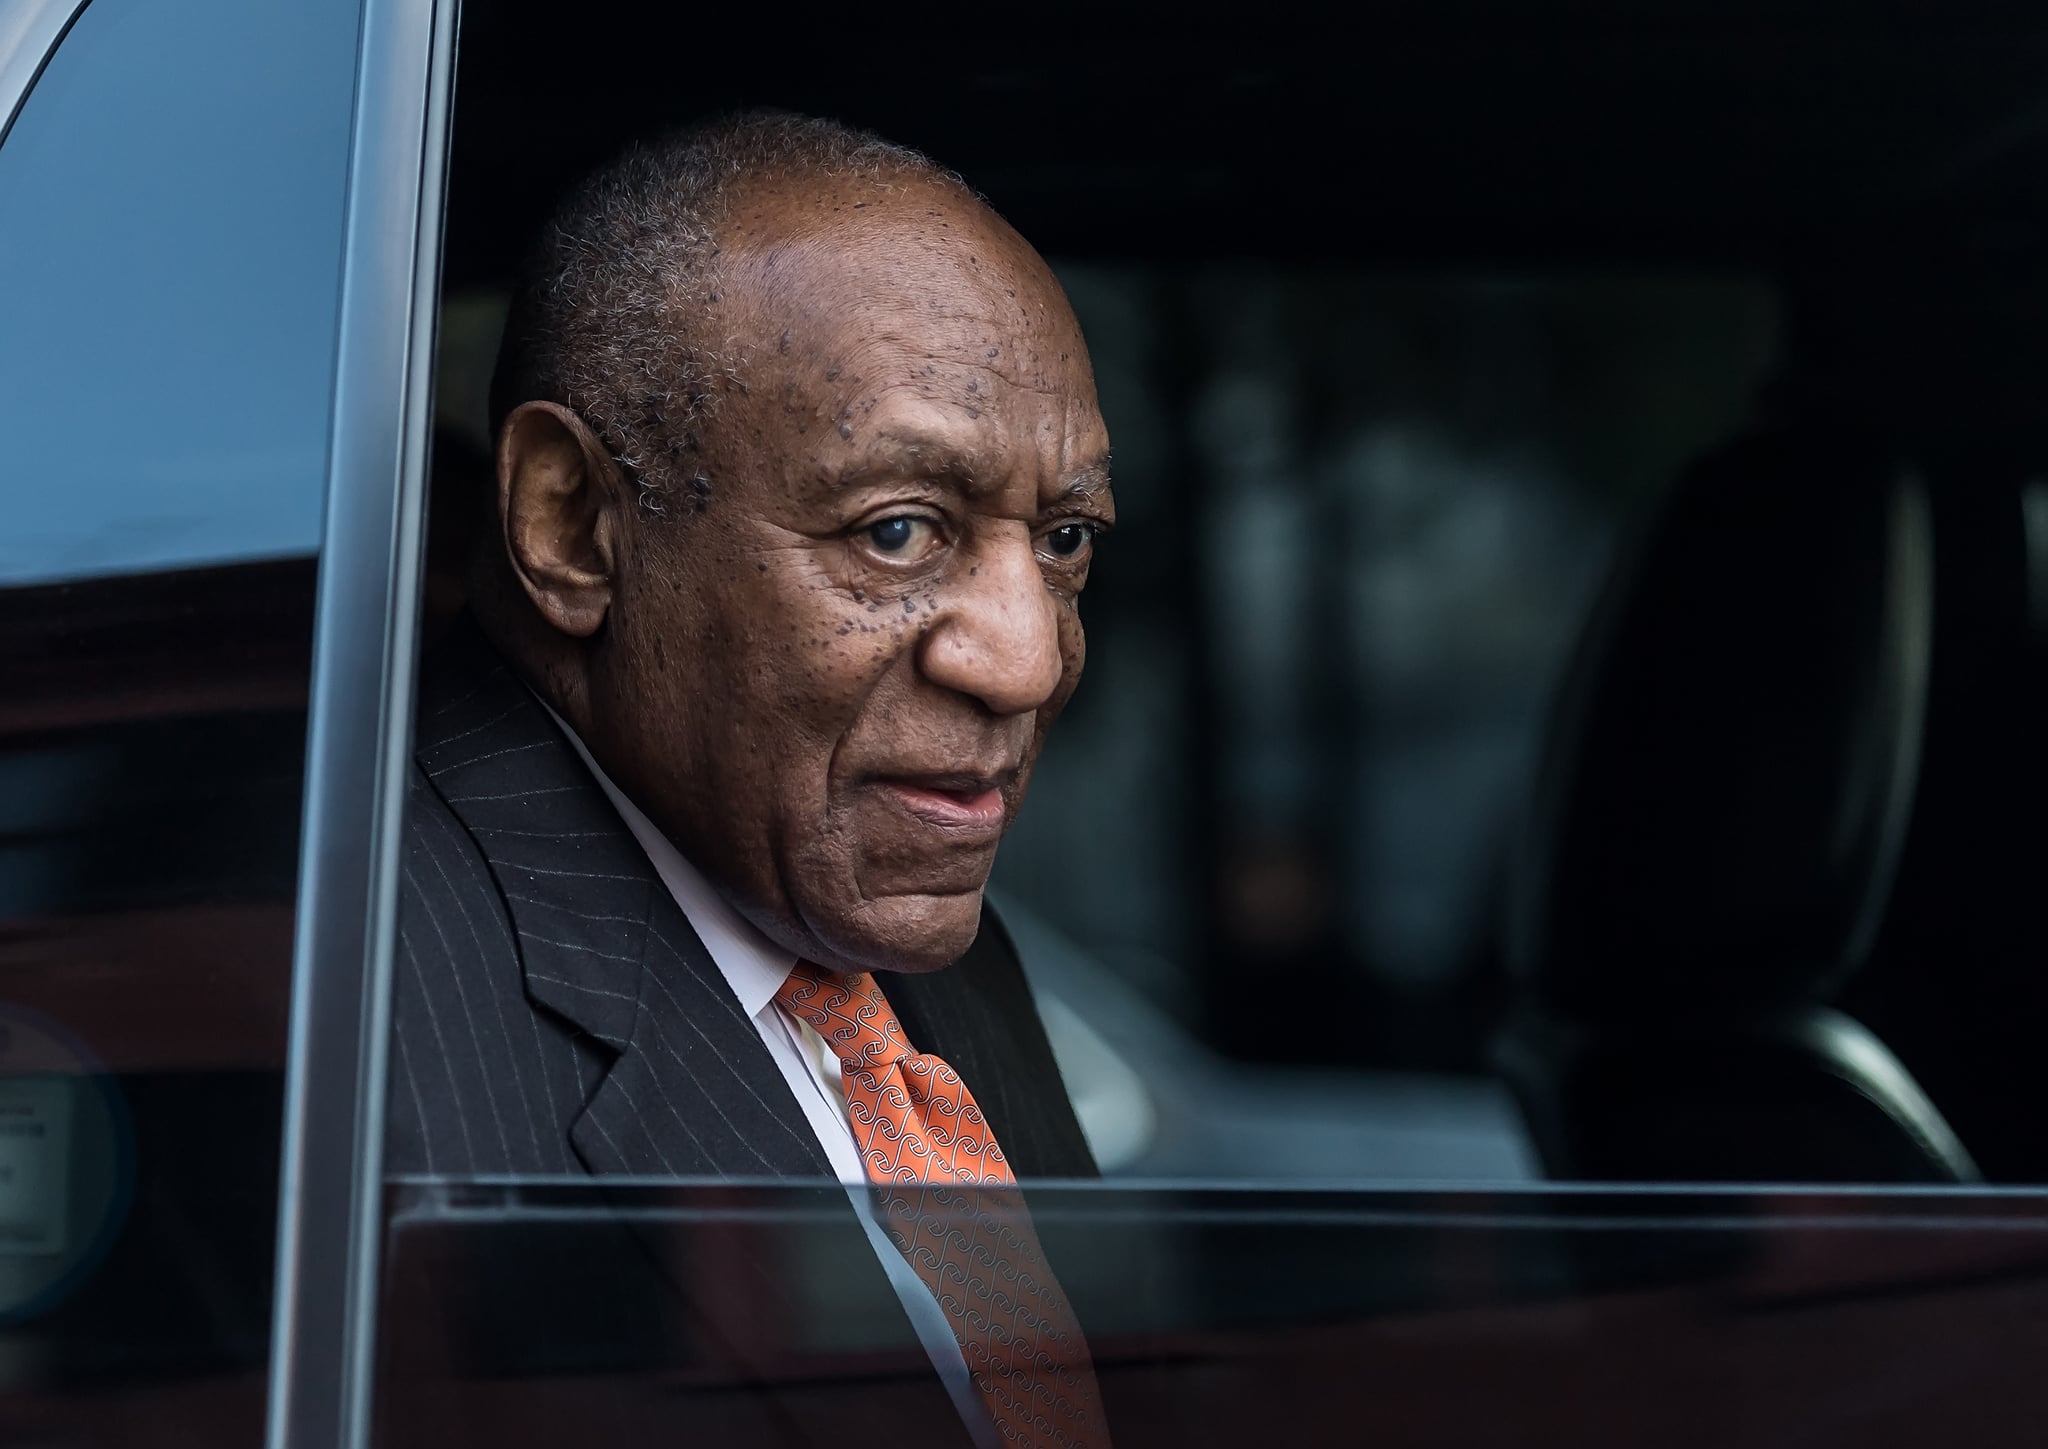 NORRISTOWN, PA - APRIL 10:  Actor/ stand-up comedian Bill Cosby leaving the Montgomery County Courthouse after the second day of his retrial for sexual assault charges on April 10, 2018 in Norristown, Pennsylvania. A former Temple University employee alleges that the entertainer drugged and molested her in 2004 at his home in suburban Philadelphia. More than 40 women have accused the 80 year old entertainer of sexual assault.  (Photo by Gilbert Carrasquillo/Getty Images)